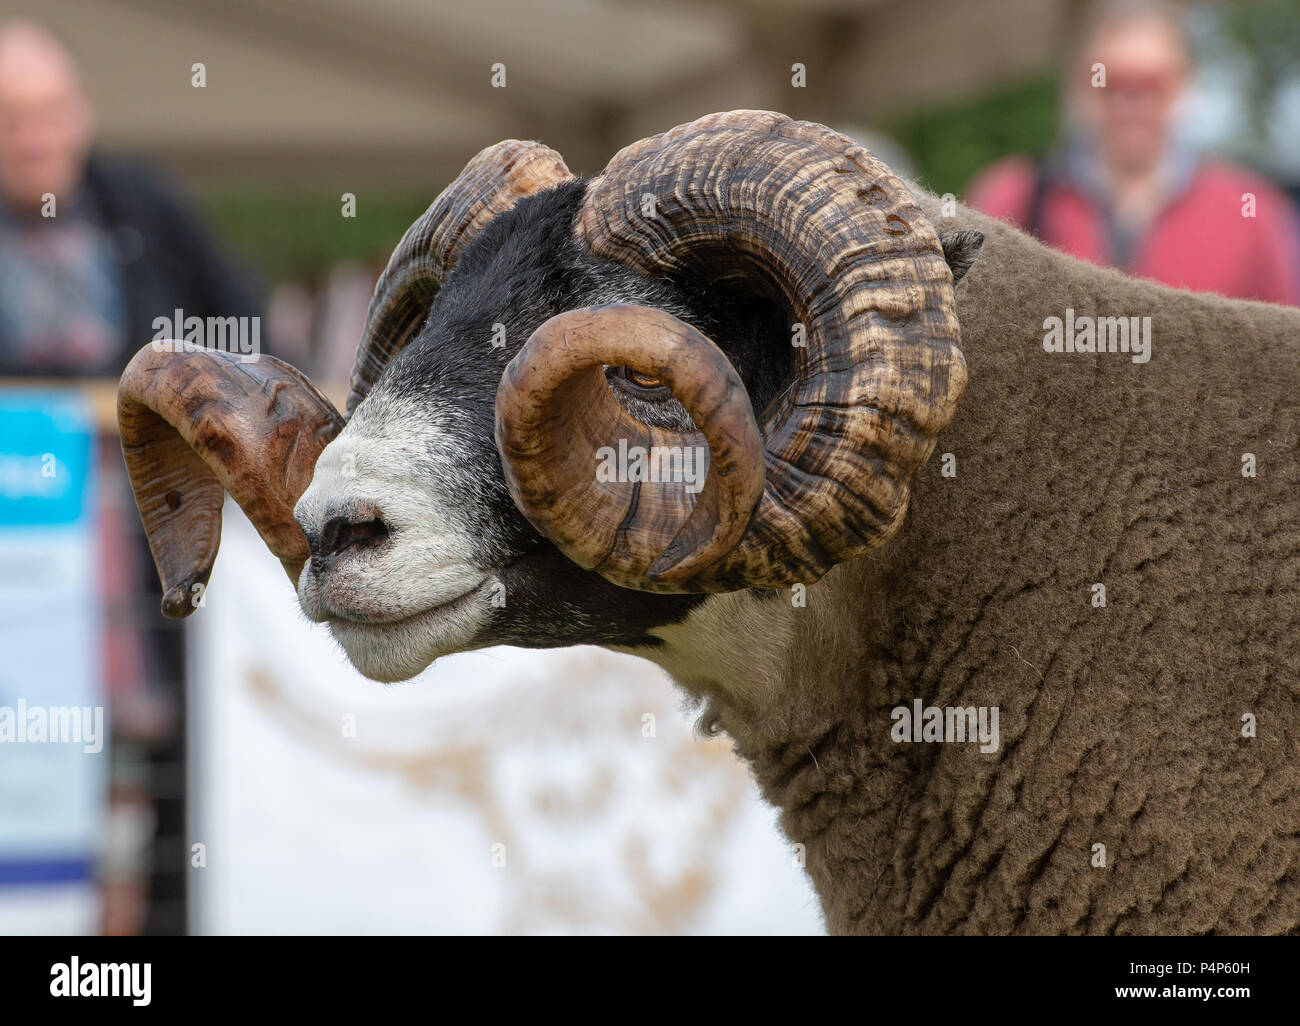 The champion Blackface sheep at the Royal Highland Show, a tup exhibited by John Wight and Son. The Blackface is the most numerous pure breed of sheep in Britain. Credit: John Eveson/Alamy Live News Stock Photo